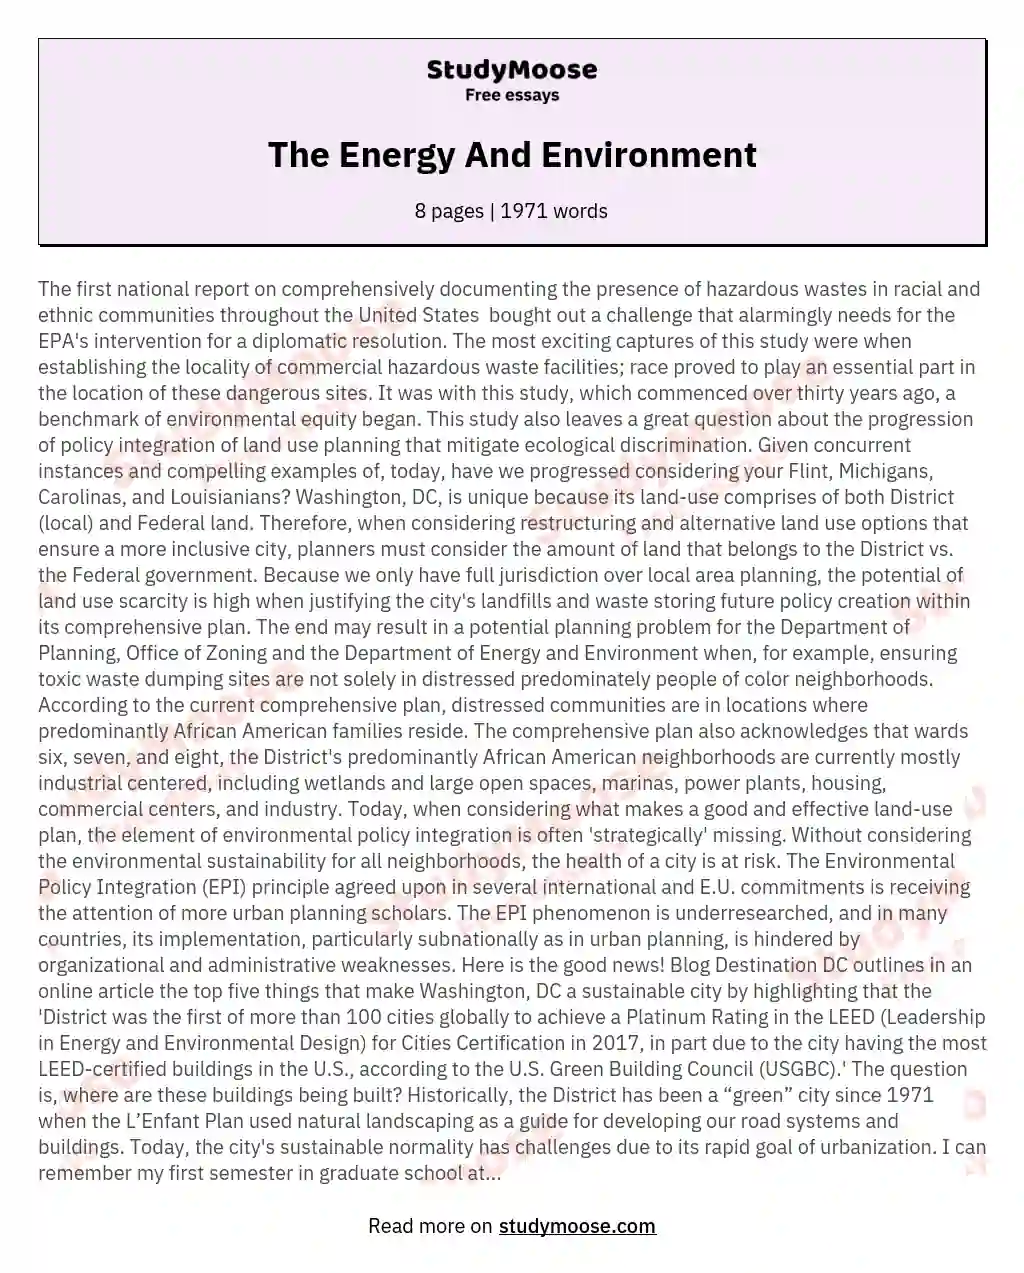 The Energy And Environment essay